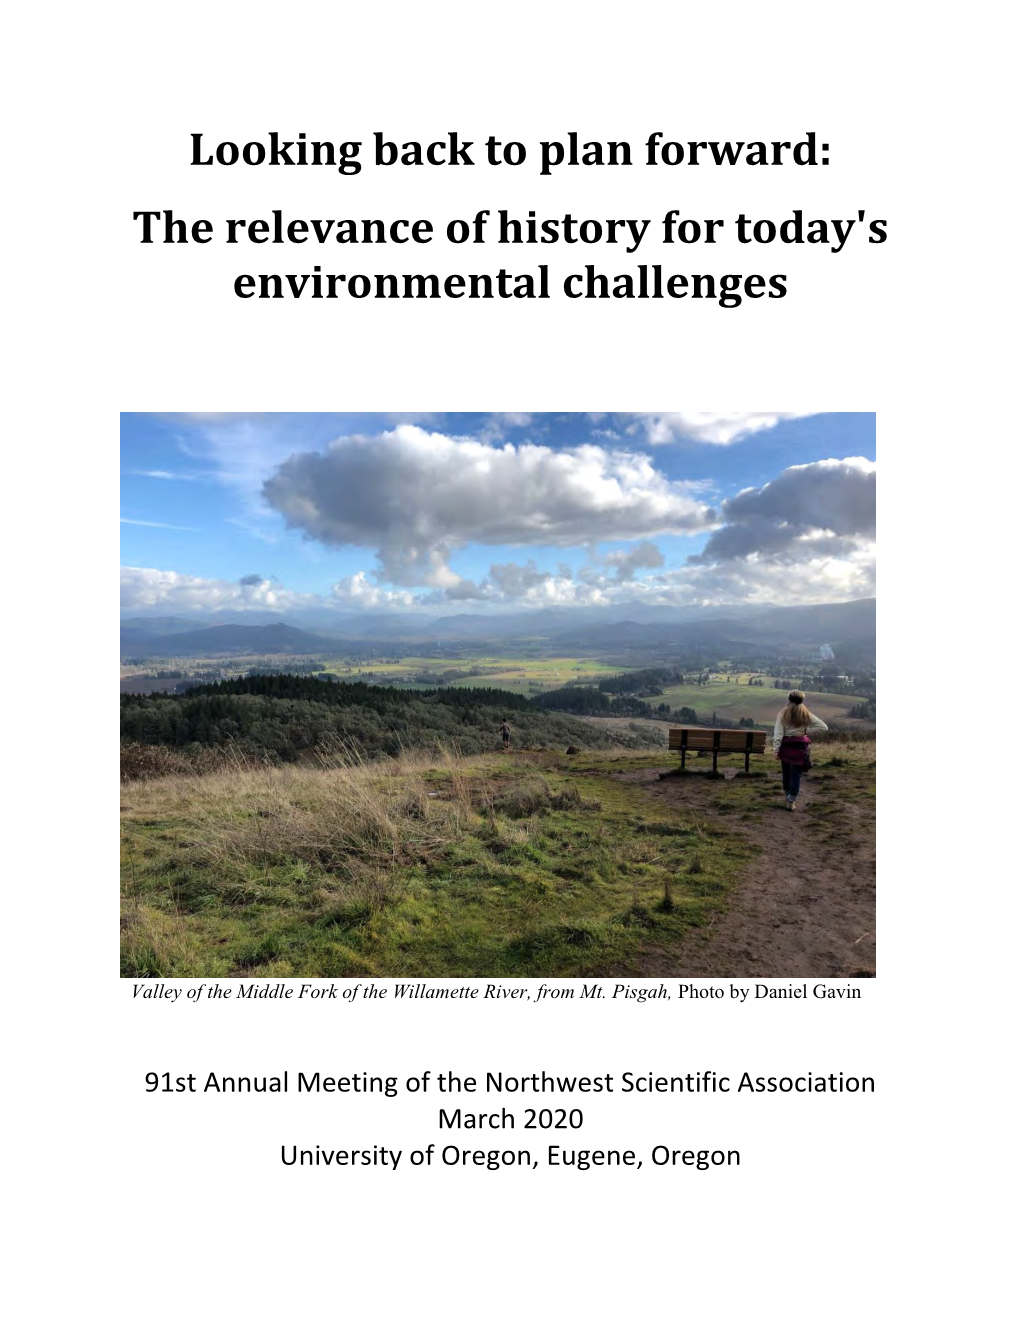 Looking Back to Plan Forward: the Relevance of History for Today's Environmental Challenges